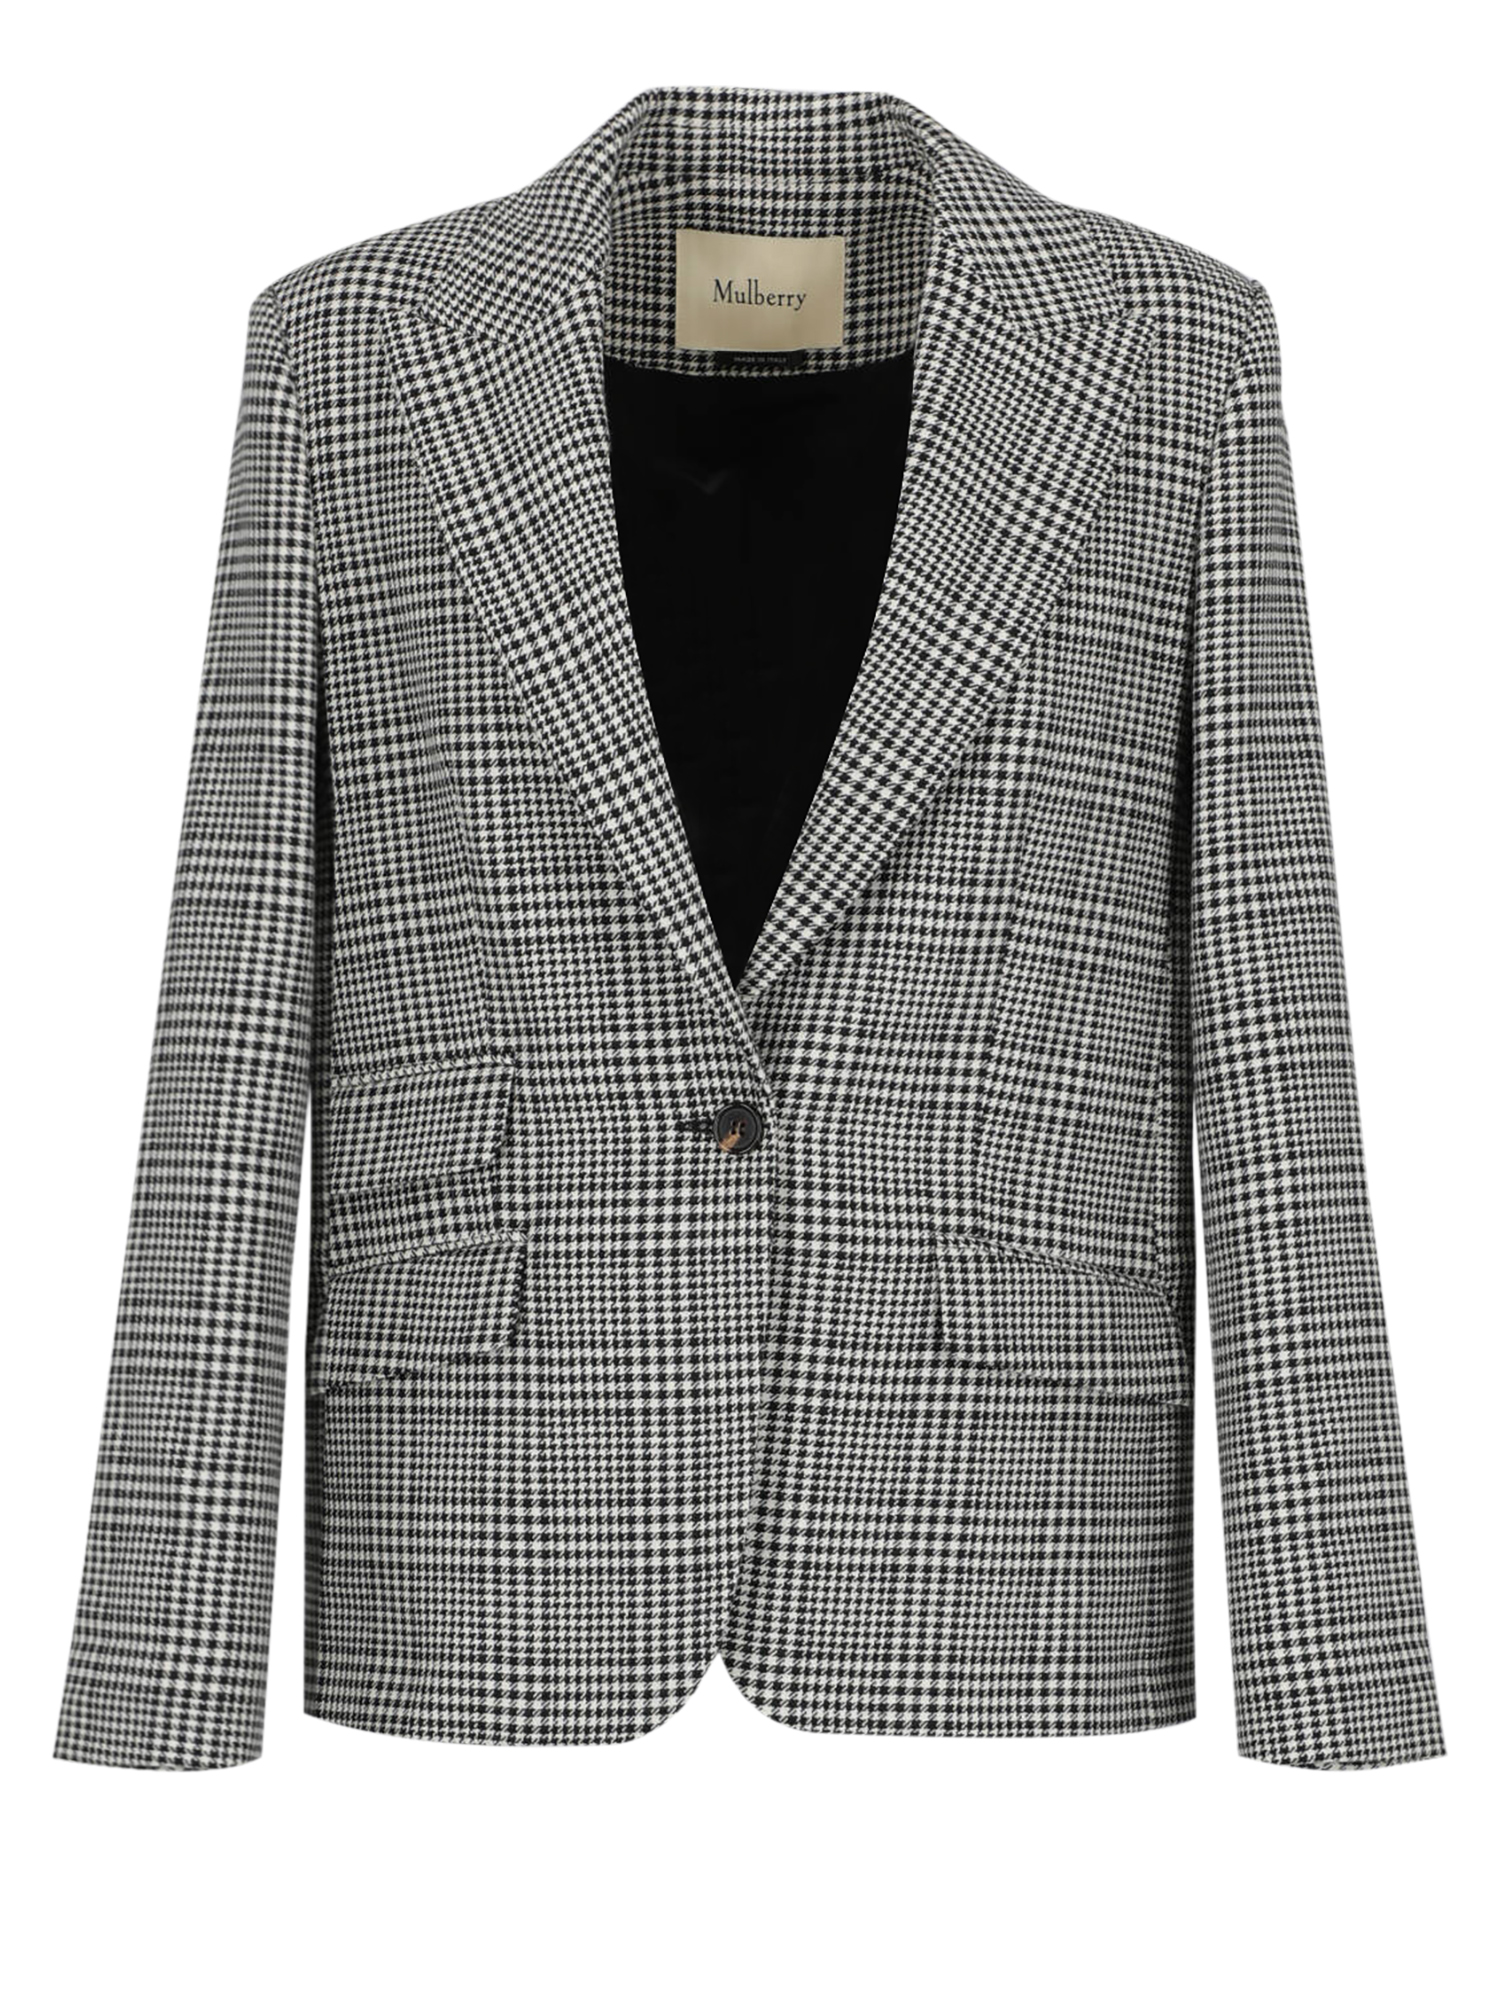 Condition: Excellent, Houndstooth Wool, Color: Black, White - M - IT 44 -